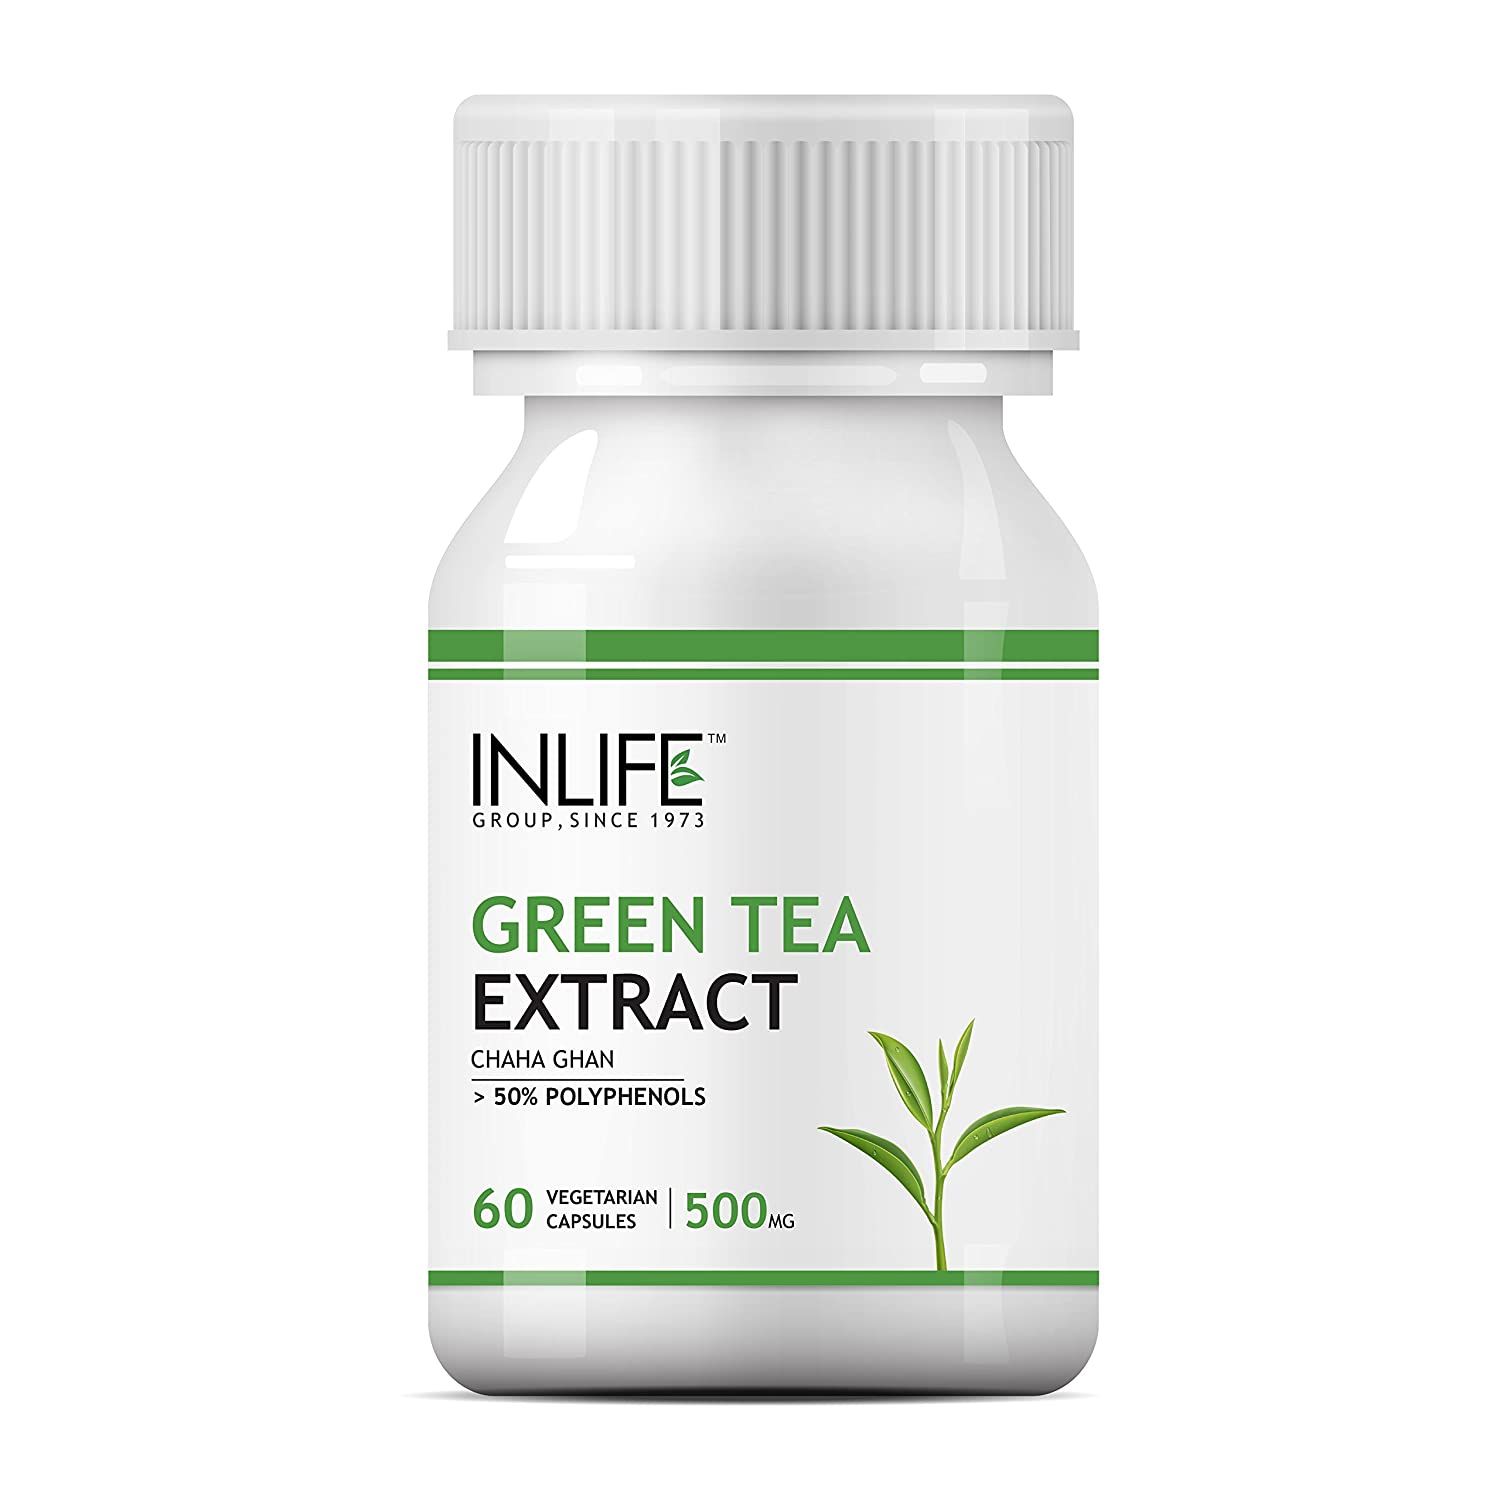 Inlife Green Tea Extract For Weight Loss Image